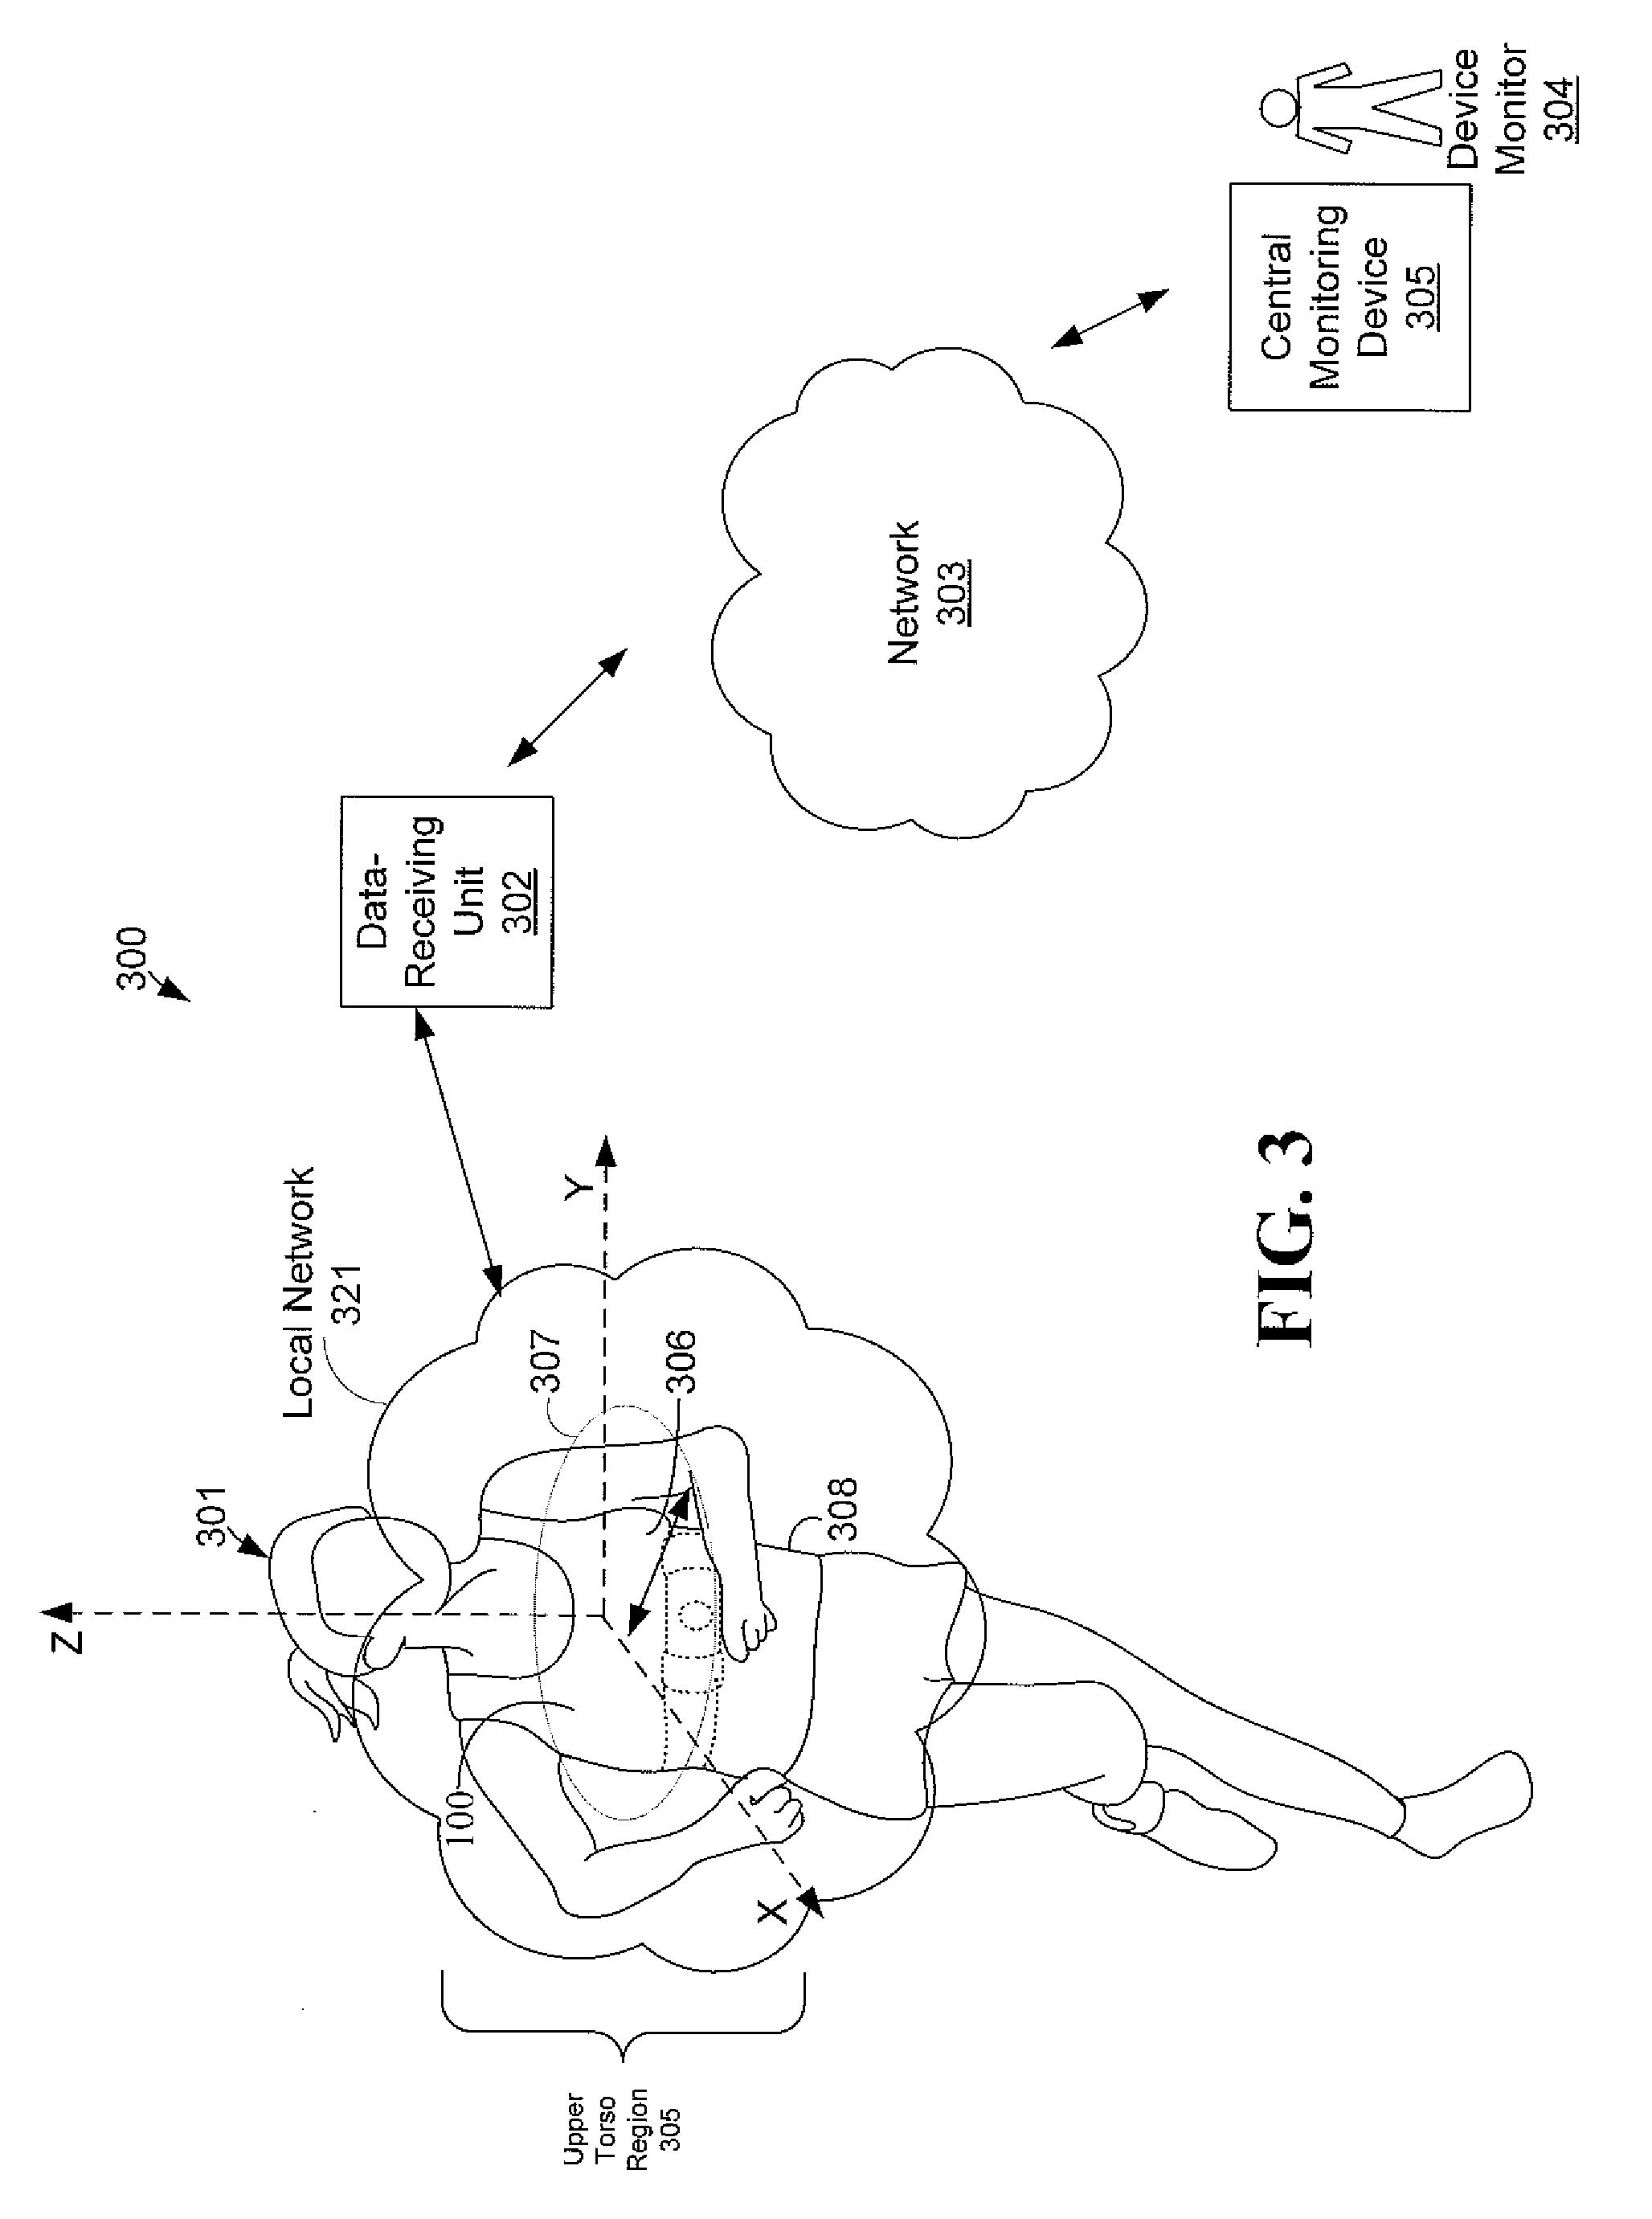 Wearable Health Monitoring Device and Methods for Fall Detection